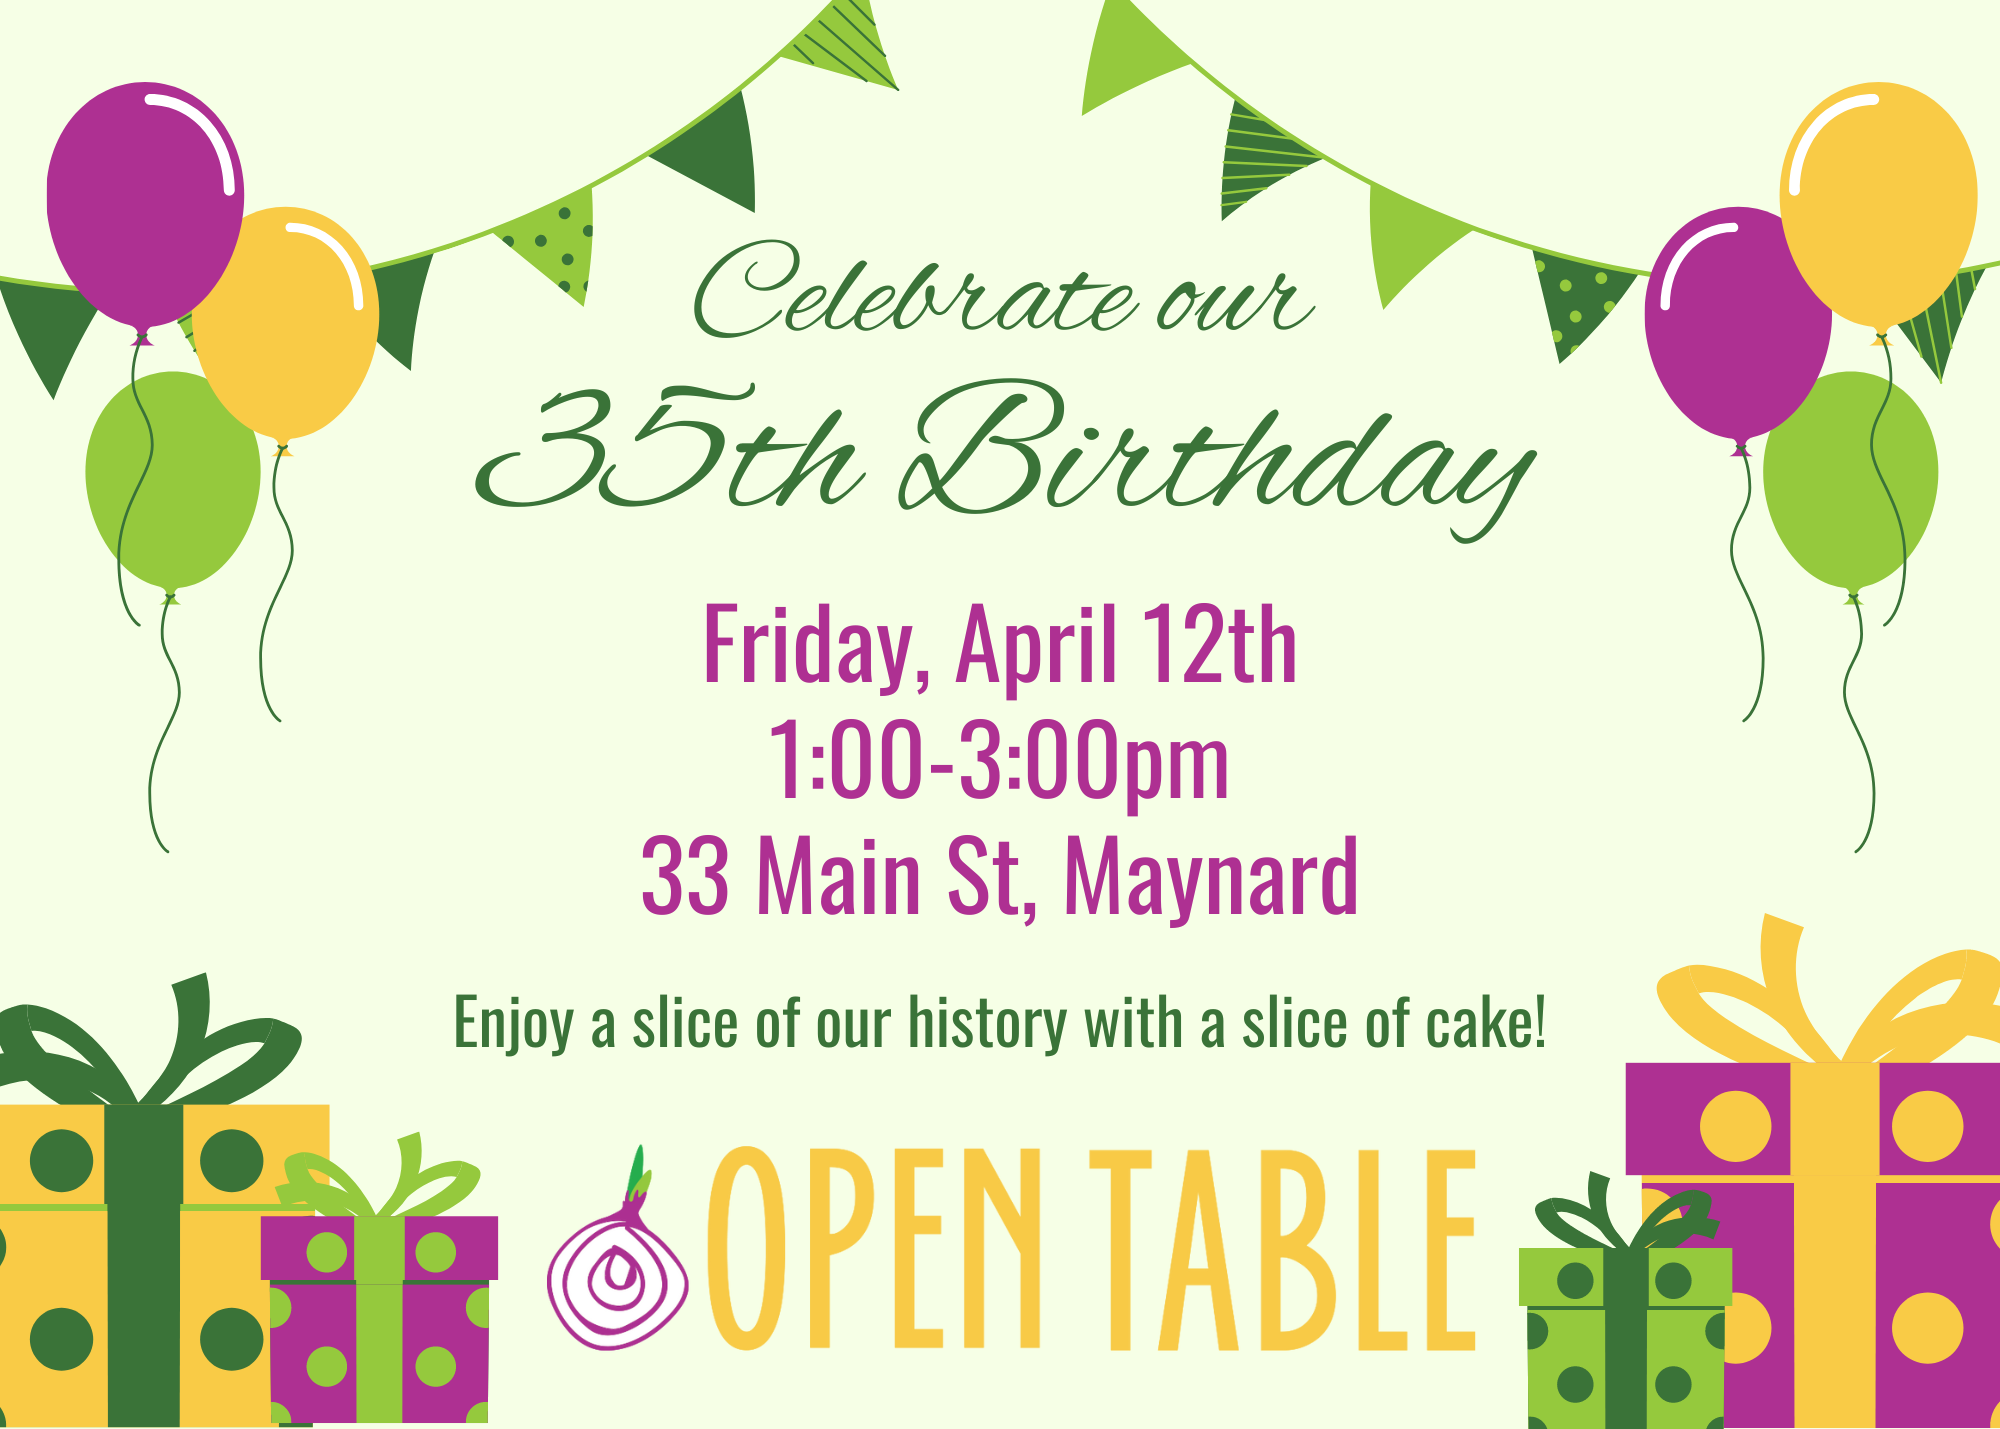 Open Table's 35th Birthday Party invitation